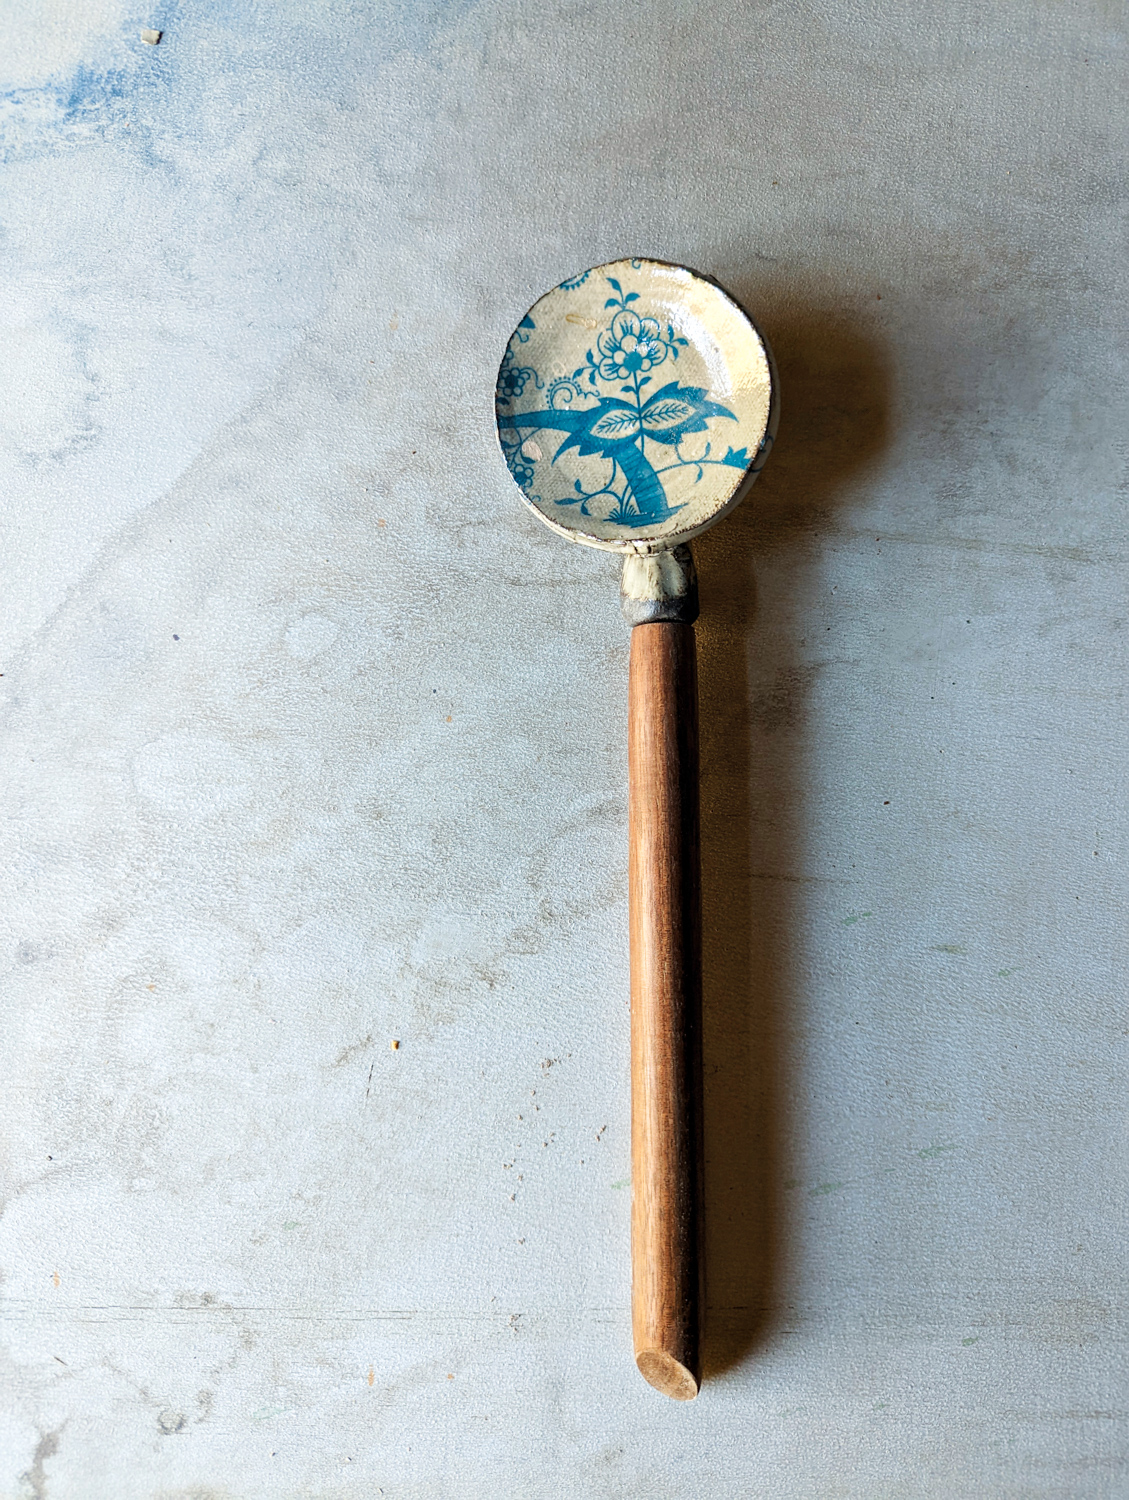 Ivory ceramic spoon with blue floral pattern and wood handle.